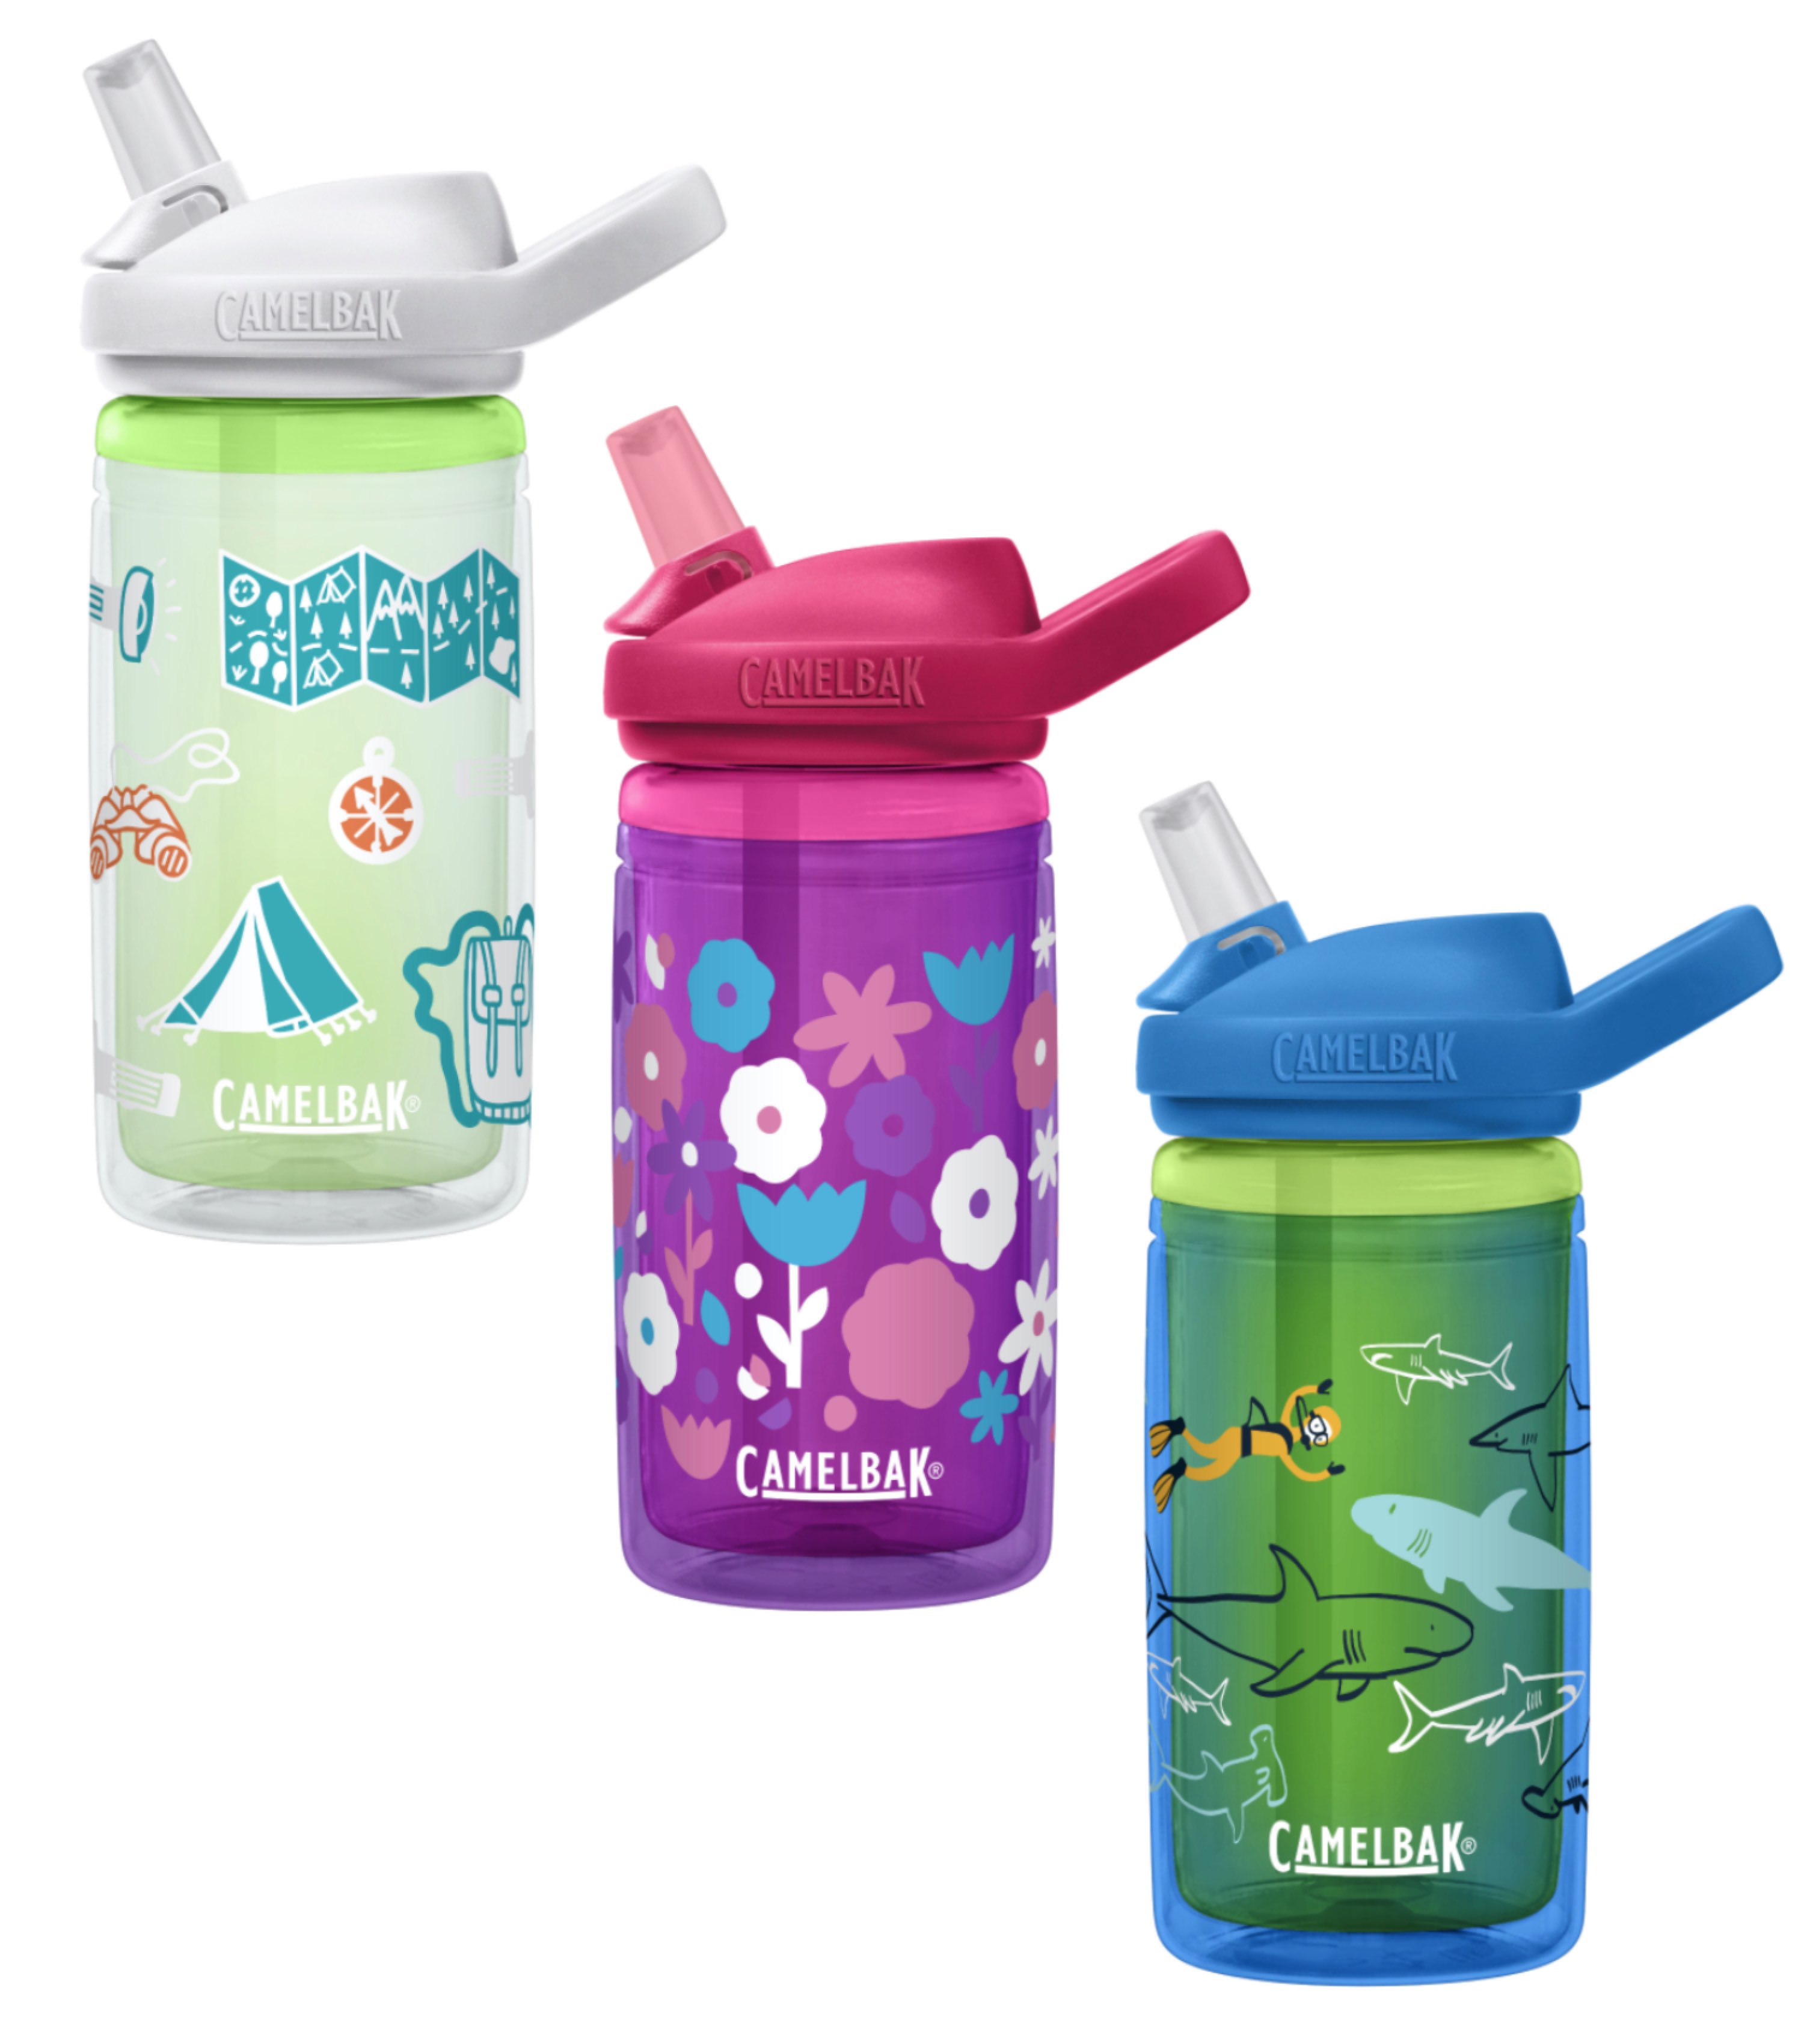 http://www.traveluniverse.com.au/Shared/Images/Product/CamelBak-Eddy-Kids-Insulated-400ml-Drink-Bottle-Made-with-Tritan-Renew-50-Recycled-Material/CB2283101040-group.jpg